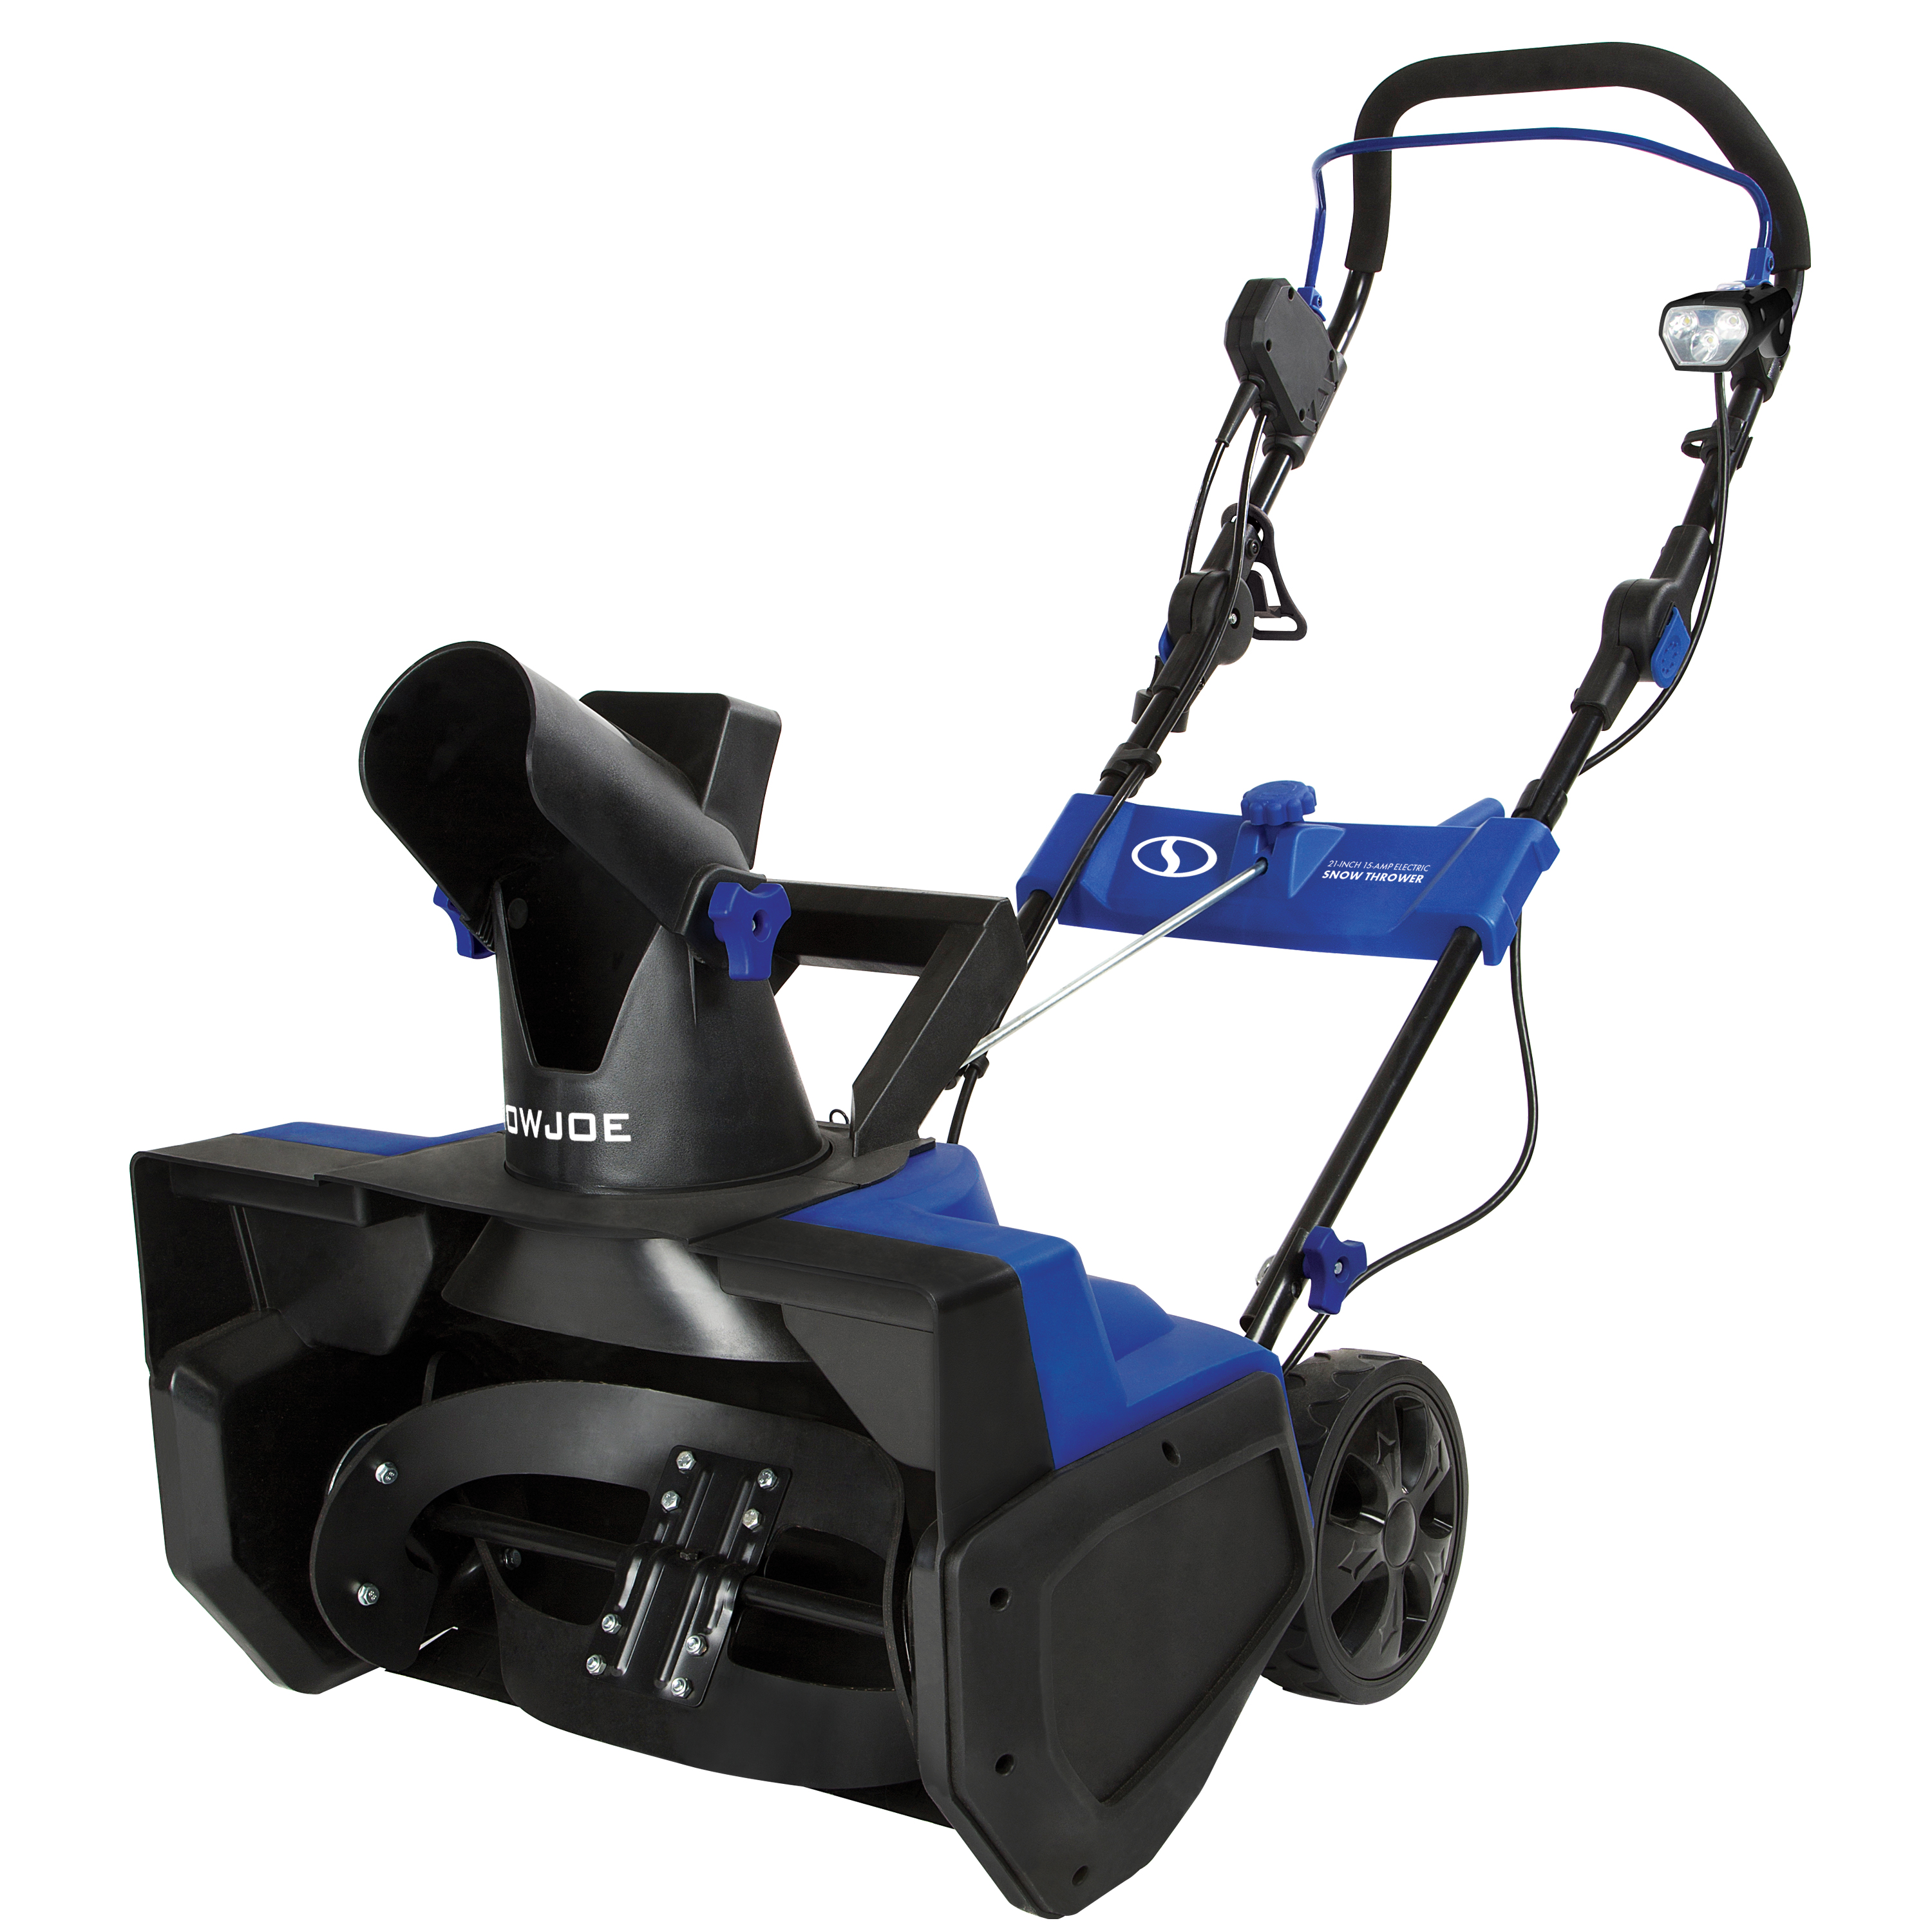 Snow Joe 21-inch Electric Single-Stage Snow Blower, 15-Amp, Directional Chute Control - image 5 of 15